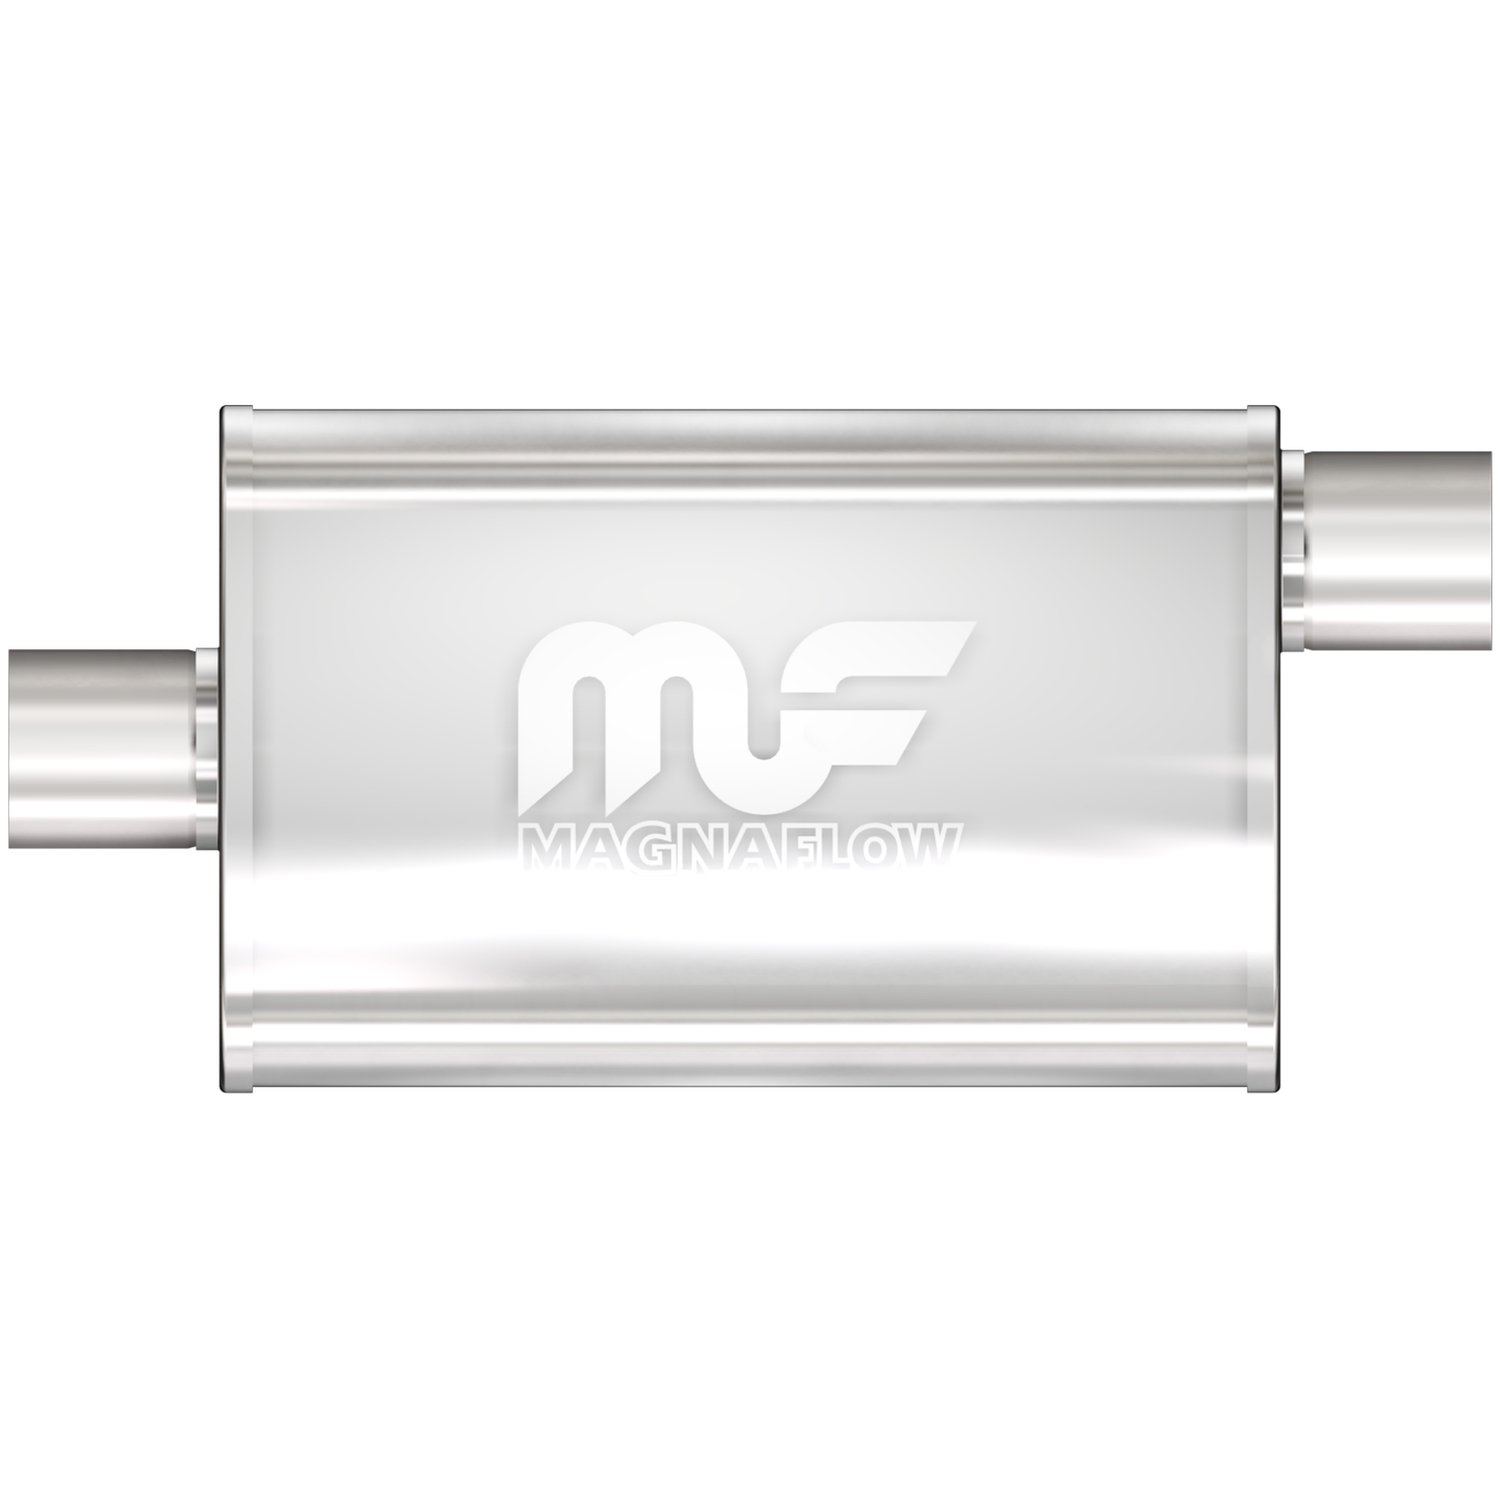 4" x 9" Oval Muffler Offset In/Center Out: 2" Body Length: 14" Overall Length: 20" Core Size: 2.5" Satin Finish